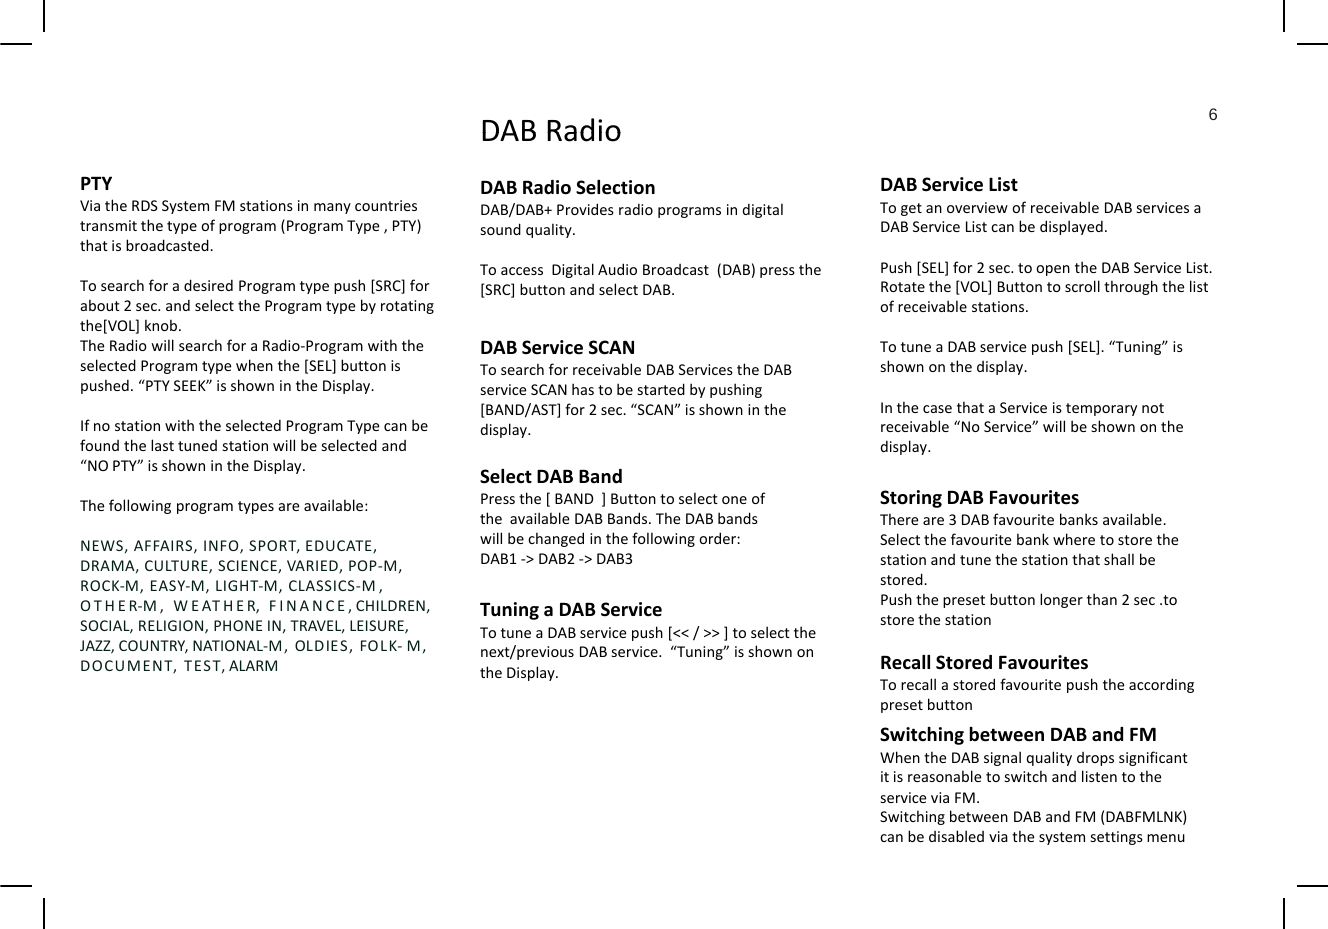 DAB Radio6DABServiceListTogetanoverviewofreceivableDABservicesaDABServiceListcanbedisplayed.Push [SEL] for 2sec to open the DAB Service ListDABRadioDABRadioSelectionDAB/DAB+Providesradioprogramsindigitalsoundquality.TDi i l Adi Bd (DAB)hPTYViatheRDSSystemFMstationsinmanycountriestransmitthetypeofprogram(ProgramType,PTY)thatisbroadcasted.Push[SEL]for2sec.toopentheDABServiceList.Rotatethe[VOL]Buttontoscrollthroughthelistofreceivablestations.TotuneaDABservicepush[SEL].“Tuning”isshownonthedisplay.ToaccessDigitalAudioBroadcast(DAB)pressthe[SRC]buttonandselectDAB.TosearchforadesiredProgramtypepush[SRC]forabout2sec.andselecttheProgramtypebyrotatingthe[VOL]knob.TheRadiowillsearchforaRadio‐ProgramwiththeselectedProgramtypewhenthe[SEL]buttonispushed.“PTYSEEK”isshownintheDisplay.DABServiceSCANTosearchforreceivableDABServicestheDABserviceSCANhastobestartedbypushingInthecasethataServiceistemporarynotreceivable“NoService”willbeshownonthedisplay.IfnostationwiththeselectedProgramTypecanbefoundthelasttunedstationwillbeselectedand“NOPTY”isshownintheDisplay.Thefollowingprogramtypesareavailable:ypg[BAND/AST]for2sec.“SCAN”isshowninthedisplay.SelectDABBandPressthe[BAND]ButtontoselectoneoftheavailableDABBands.TheDABbandsStoringDABFavouritesThereare3DABfavouritebanksavailable.NEWS,AFFAIRS,INFO,SPORT, EDUCATE,DRAMA,CULTURE,SCIENCE,VARIED,POP‐M,ROCK‐M,EASY‐M,LIGHT‐M,CLASSICS‐M,OTHER‐M,WEATHER,FINANCE,CHILDREN,SOCIAL,RELIGION,PHONEIN,TRAVEL,LEISURE,JAZZ,COUNTRY,NATIONAL‐M,OLDIES,FOLK‐M,DOCUMENTTESTALARMwillbechangedinthefollowingorder:DAB1‐&gt;DAB2‐&gt;DAB3TuningaDABServiceTotuneaDABservicepush[&lt;&lt;/&gt;&gt;]toselectthenext/previousDABservice.“Tuning”isshownonSelectthefavouritebankwheretostorethestationandtunethestationthatshallbestored.Pushthepresetbuttonlongerthan2sec.tostorethestationRecall Stored FavouritesDOCUMENT,TEST,ALARMtheDisplay.RecallStoredFavouritesTorecallastoredfavouritepushtheaccordingpresetbuttonSwitchingbetweenDABandFMWhentheDABsignalqualitydropssignificantitisreasonabletoswitchandlistentotheservice via FMserviceviaFM.SwitchingbetweenDABandFM(DABFMLNK)canbedisabledviathesystemsettingsmenu